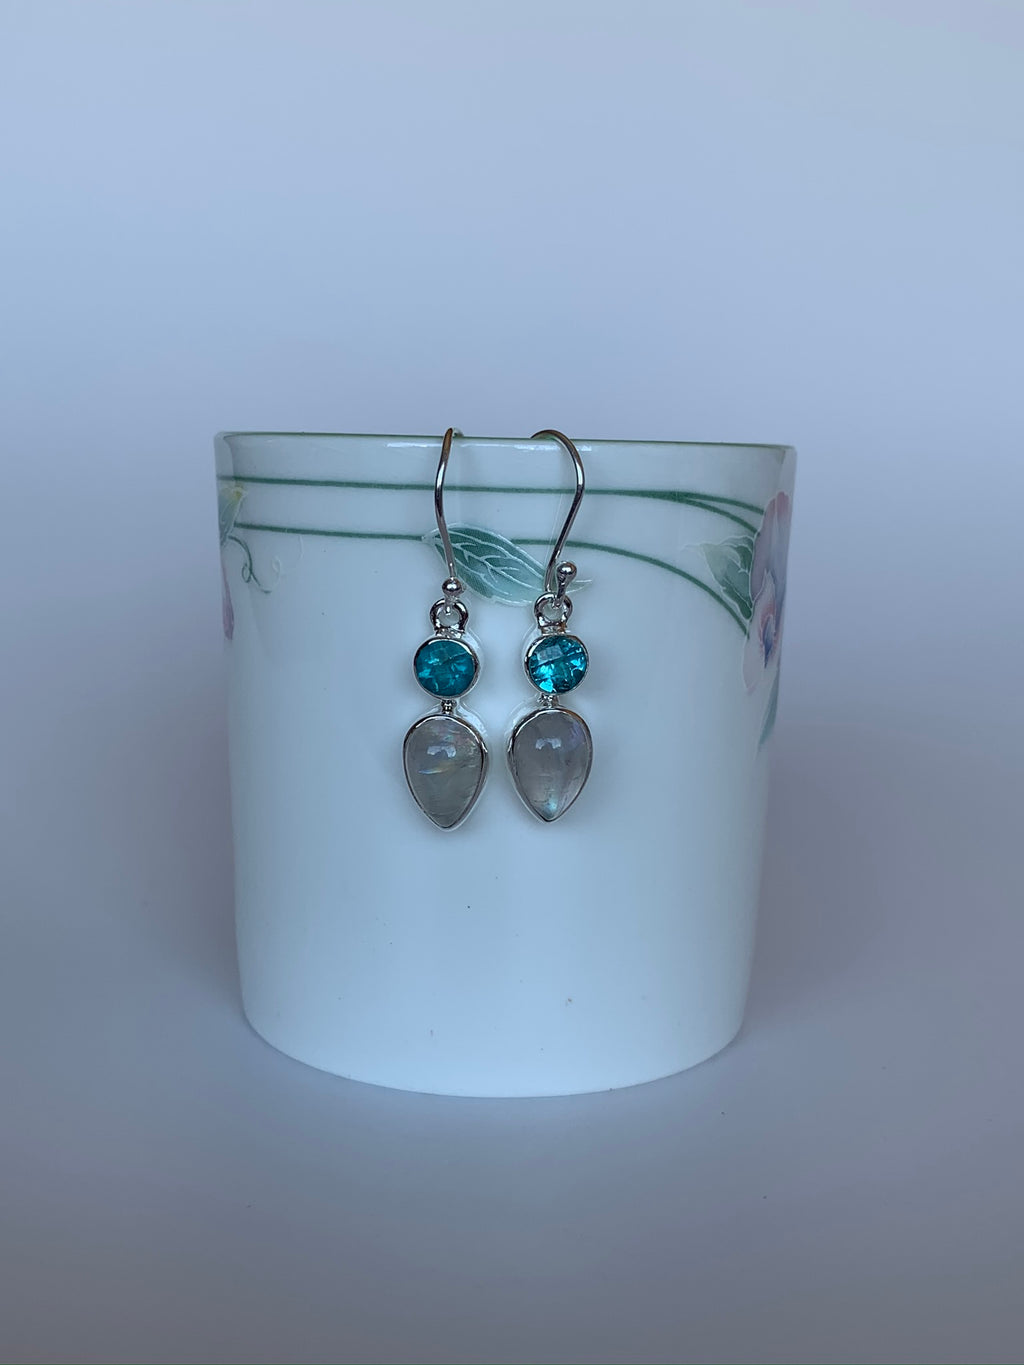 Sterling silver earrings with wires for wearing. Stones are small round faceted blue apatite with a reverse tear drop moonstone hanging below it.  Approximately 1½" long. Natural inclusions  & variations in stones are normal as each stone is unique. These beauties are handcrafted by artisans.